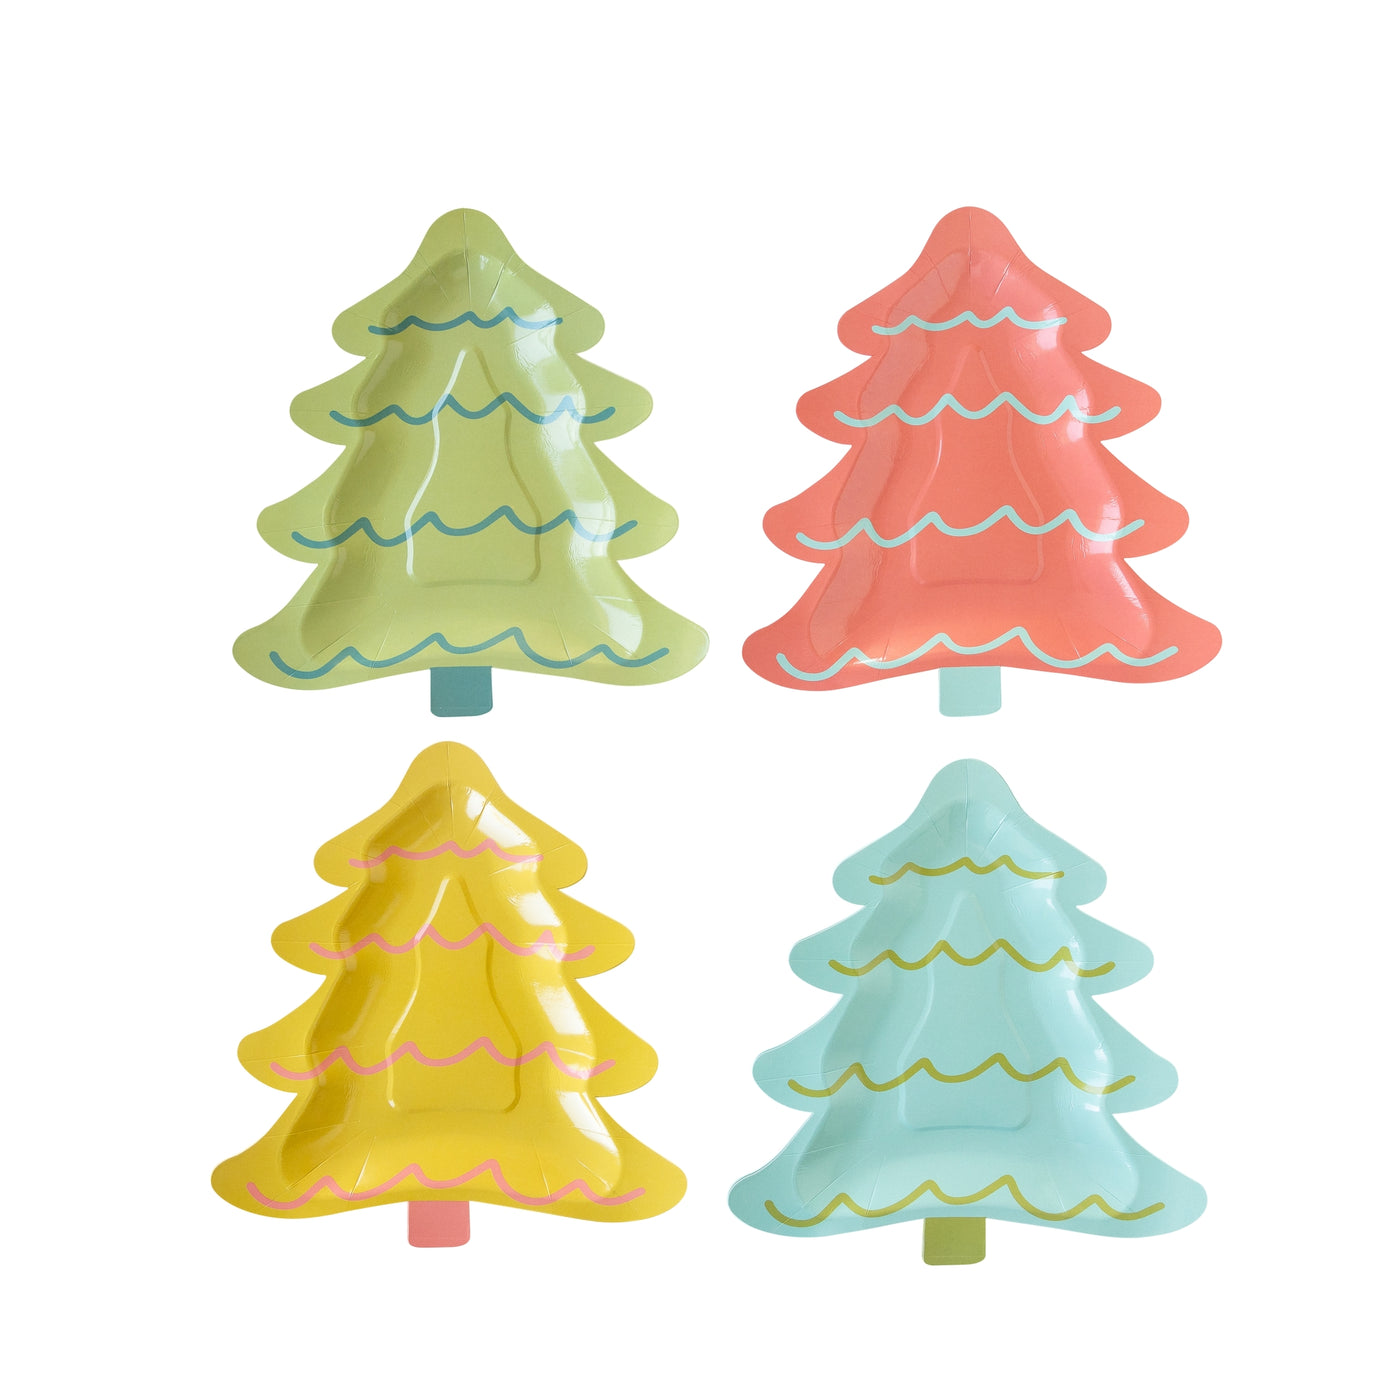 BRT1040 - Bright Holiday Tree Shaped Paper Plate Set